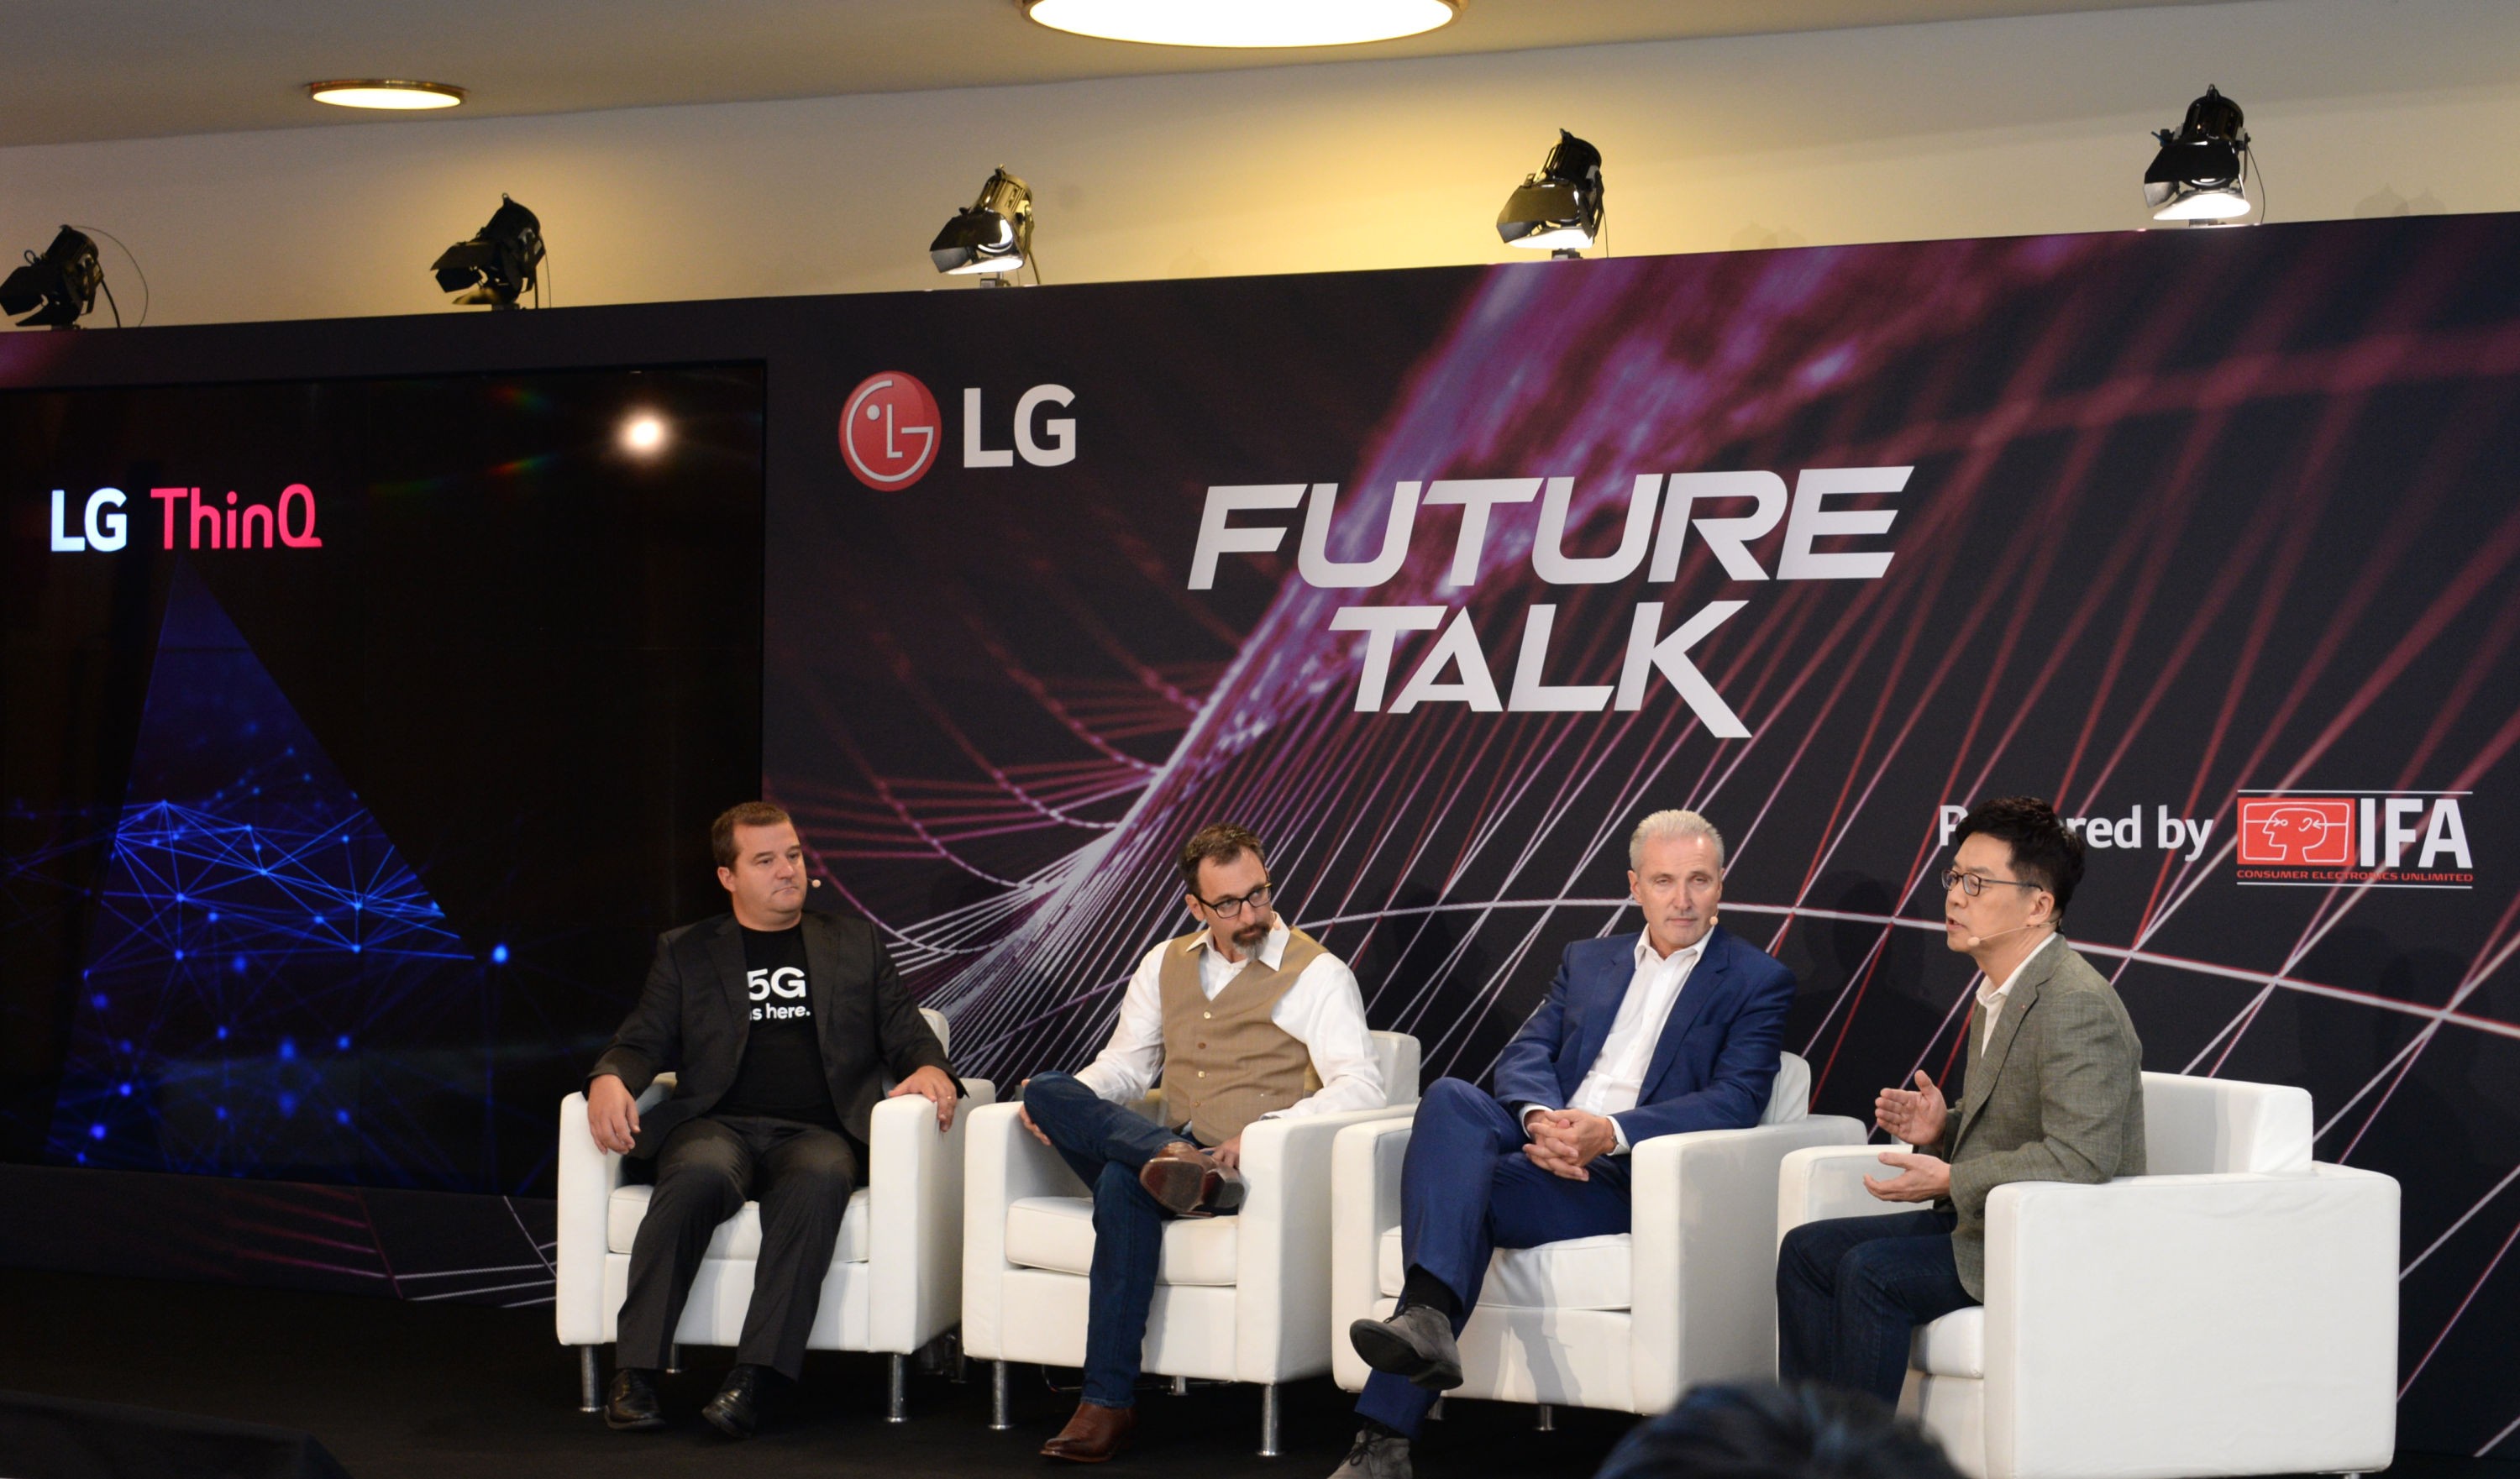 Dr. I.P. Park, president and CTO of LG Electronics, conducts a panel talk with three guest speakers from Qualcomm, iF International Forum Design and Telefonica’s moonshot factory Alpha.